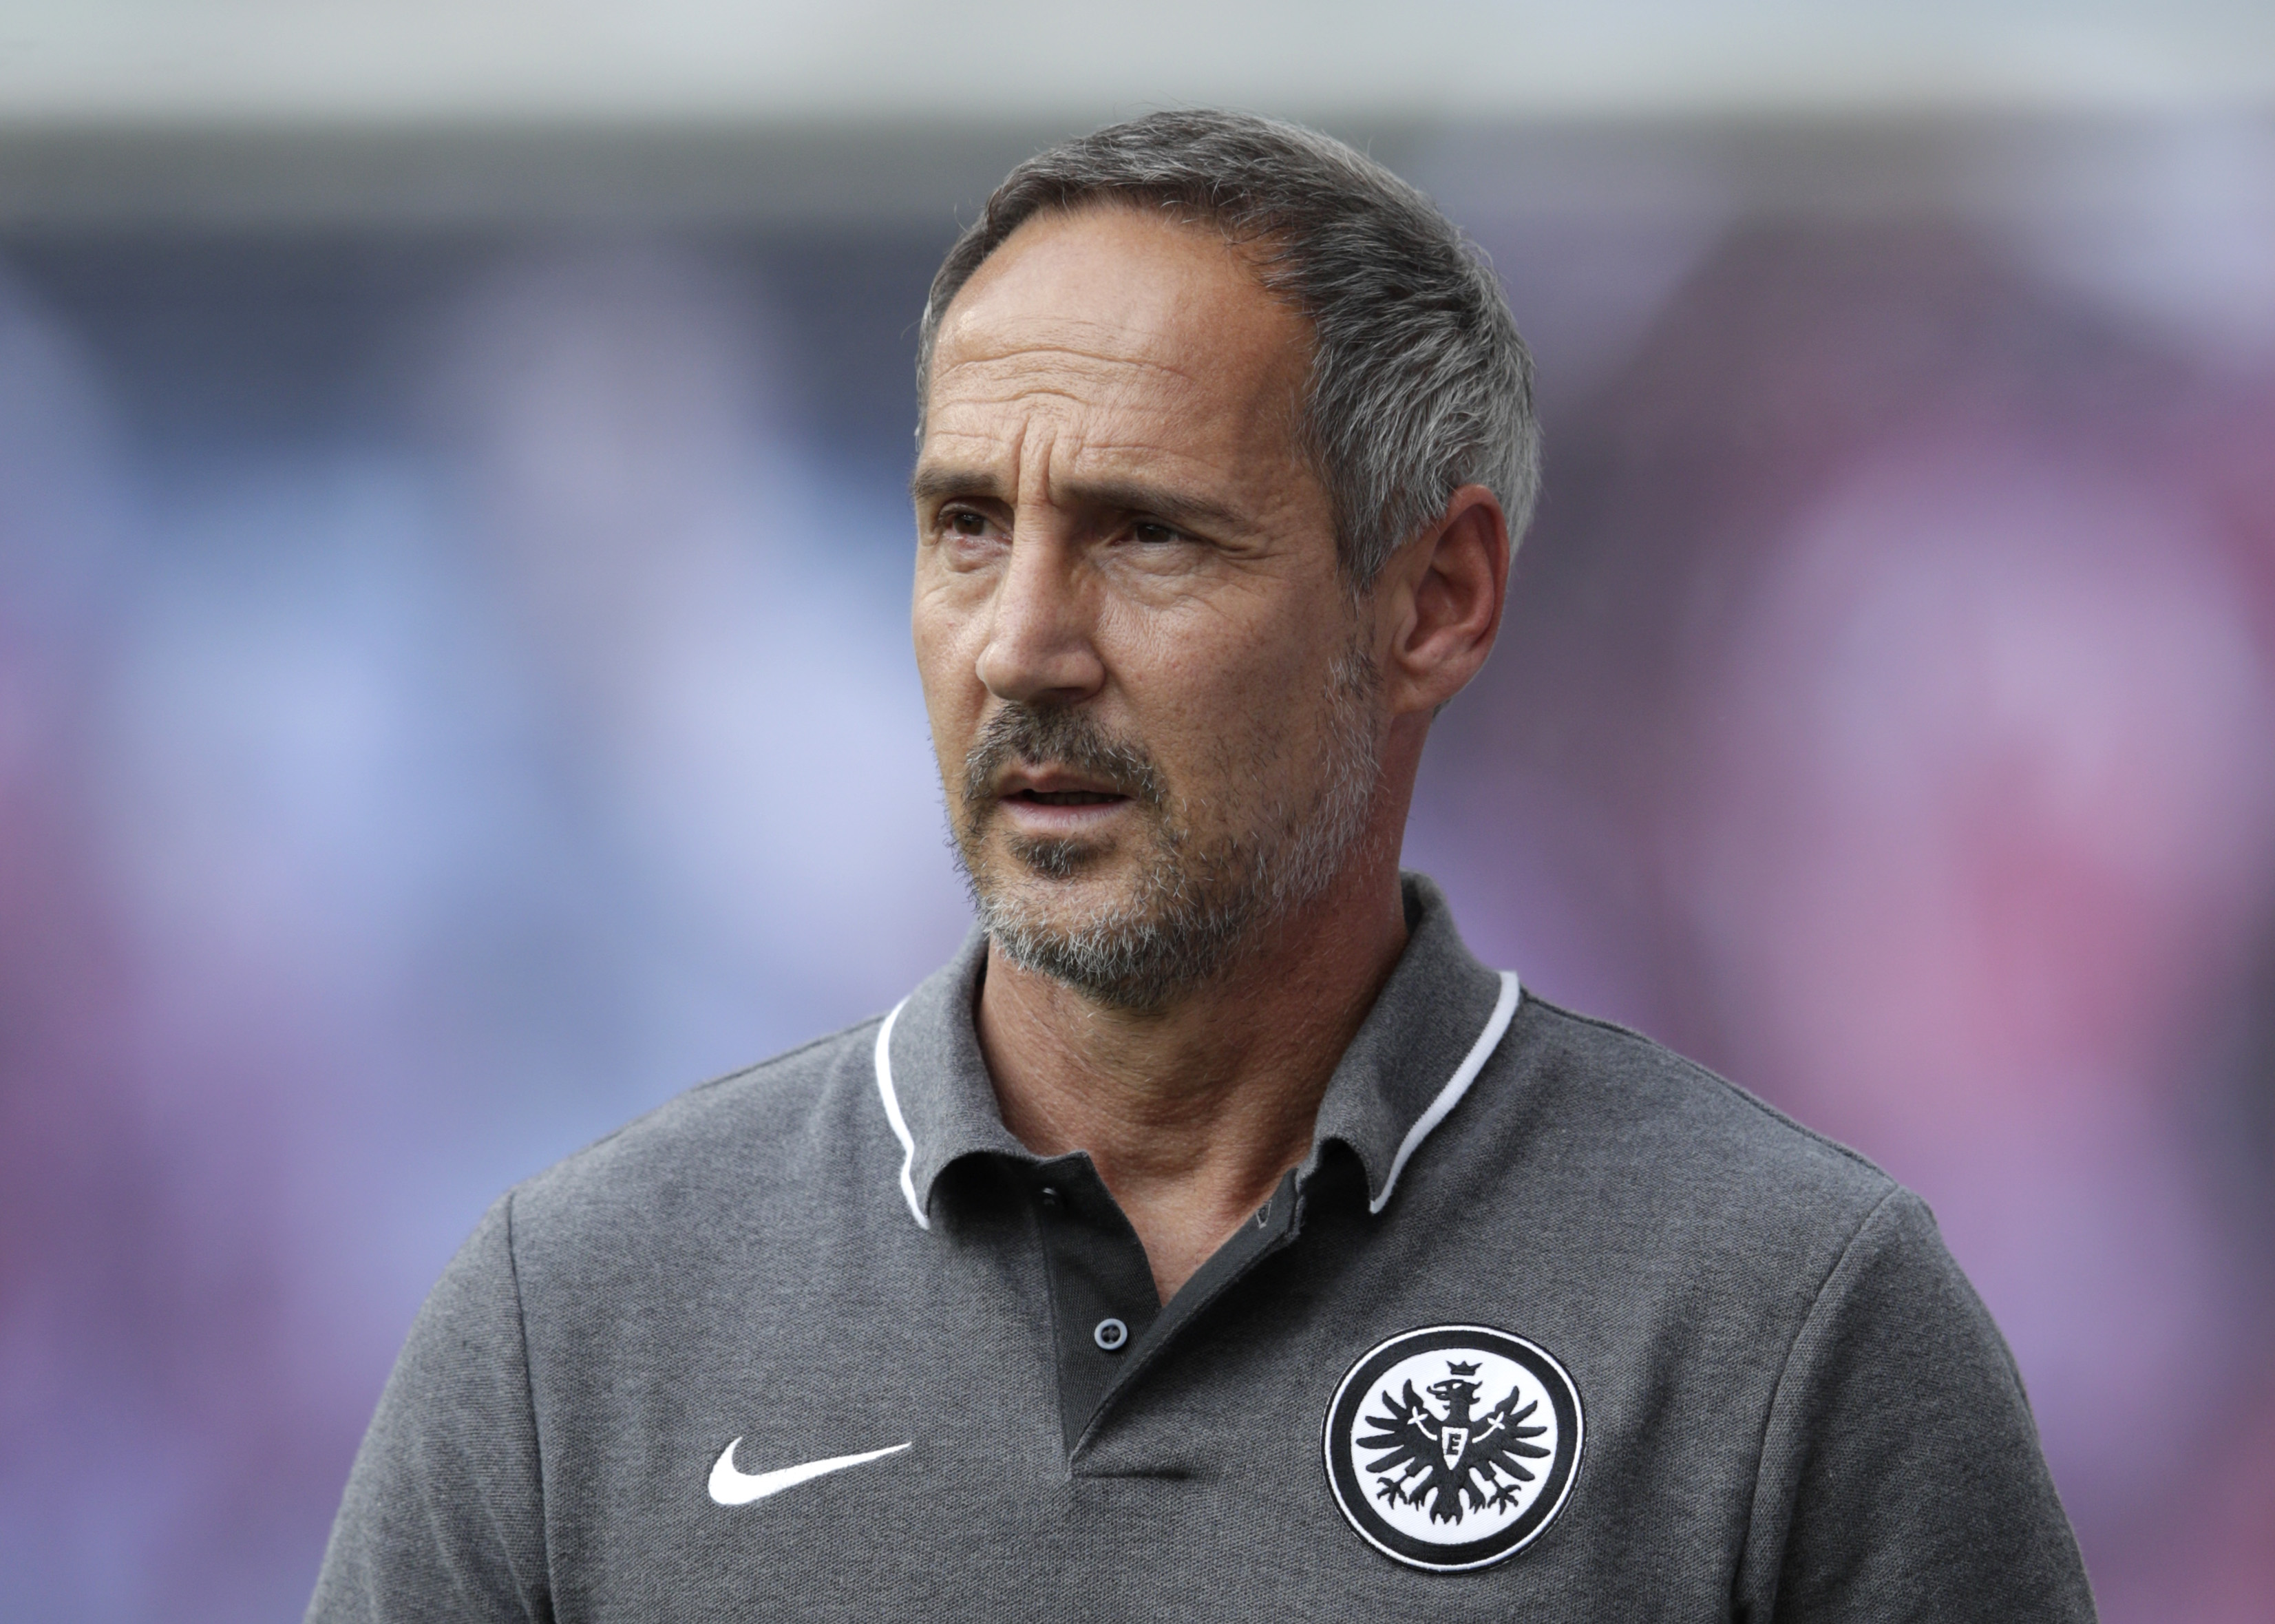 LEIPZIG, GERMANY - AUGUST 25: Adi Hutter, head coach of Eintracht Frankfurt looks on prior to the Bundesliga match between RB Leipzig and Eintracht Frankfurt at Red Bull Arena on August 25, 2019 in Leipzig, Germany. (Photo by Adam Pretty/Bongarts/Getty Images)